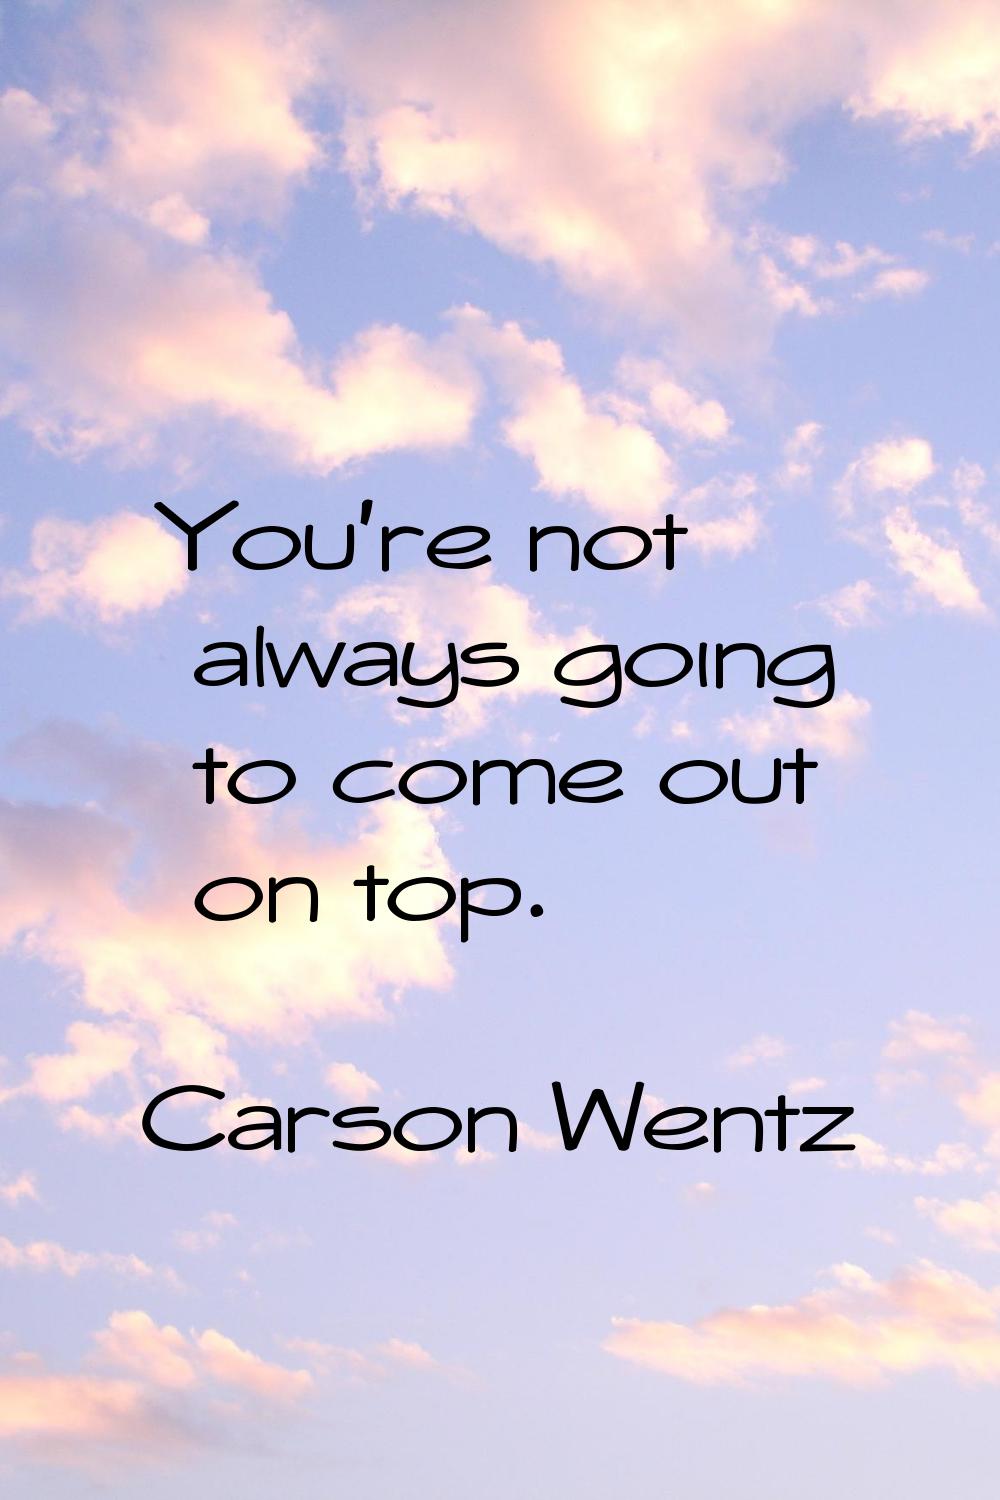 You're not always going to come out on top.